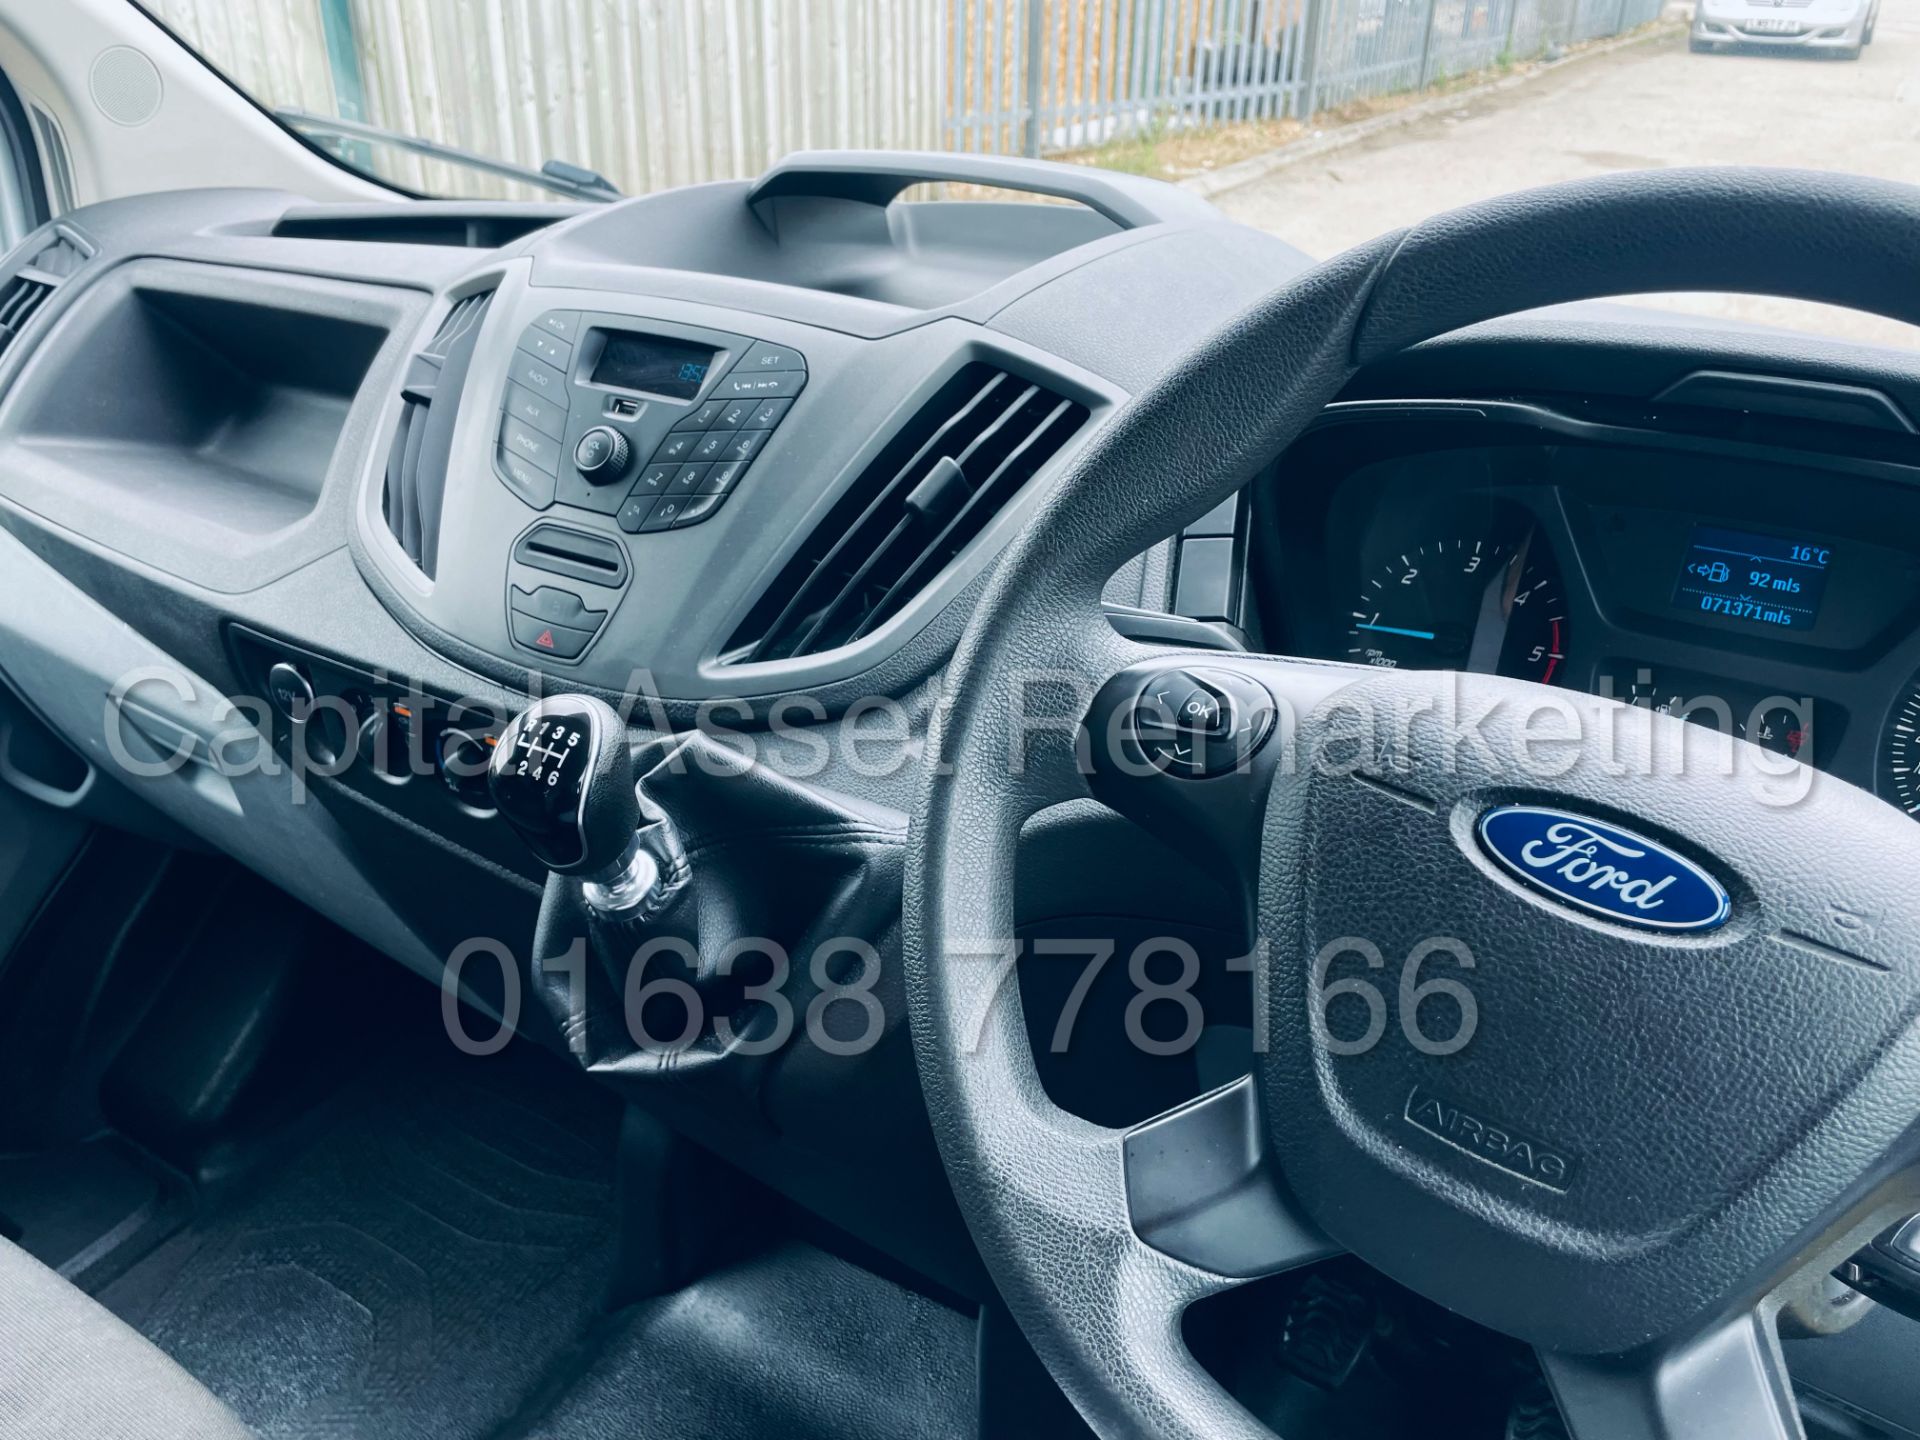 FORD TRANSIT 130 T350 *L4 - XLWB HI-ROOF* (2019 - EURO 6) '2.0 TDCI - 6 SPEED' (1 OWNER) *AIR CON* - Image 32 of 42